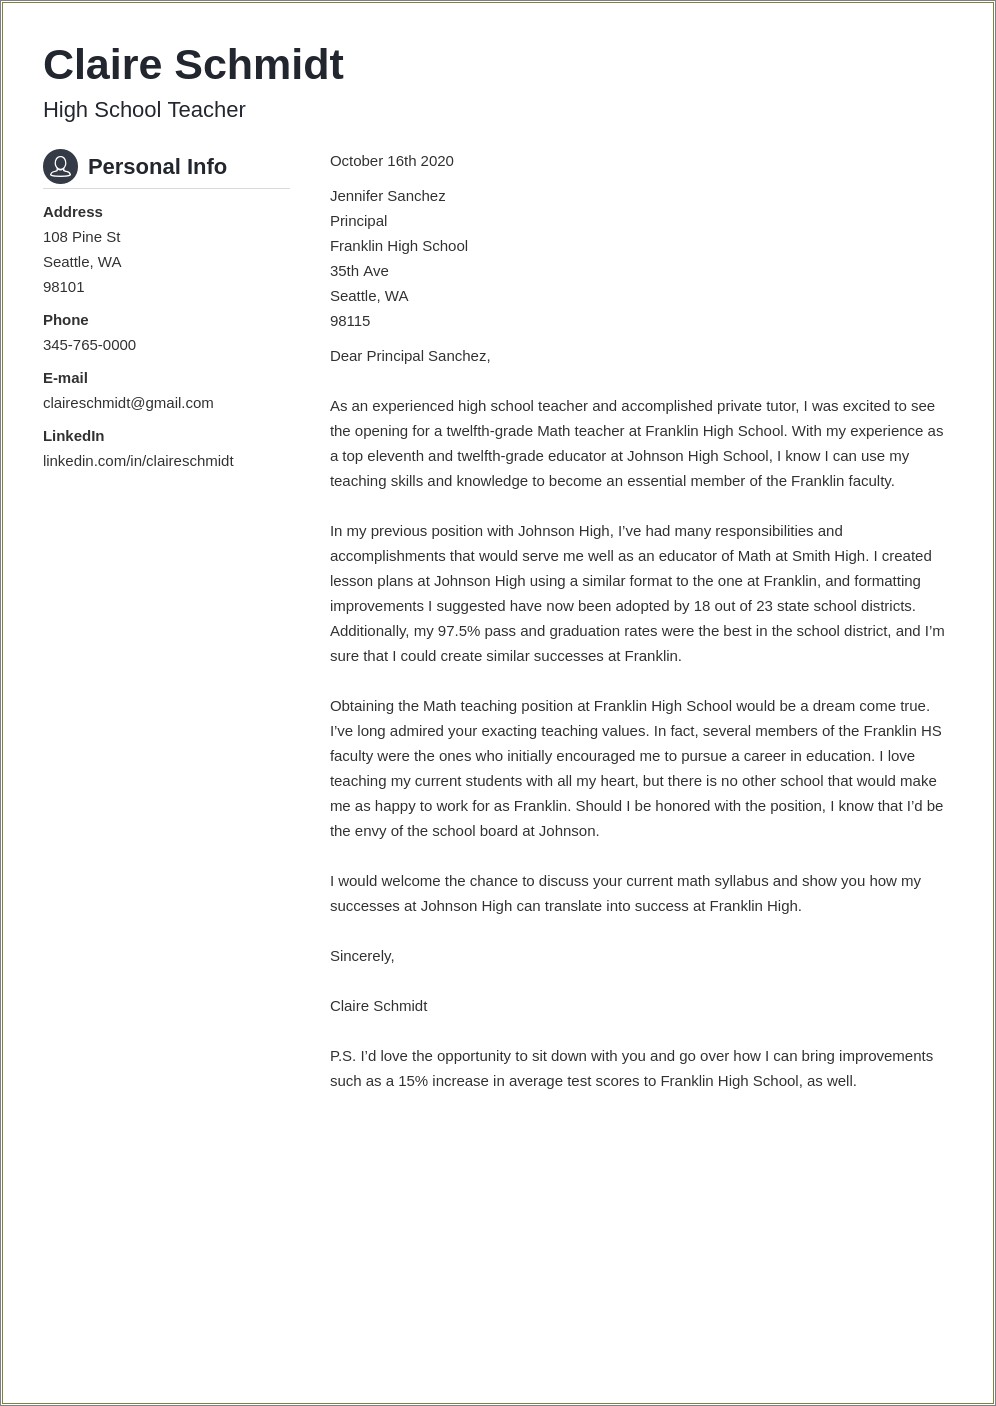 Merge Cover Letter And Resume Into One Document